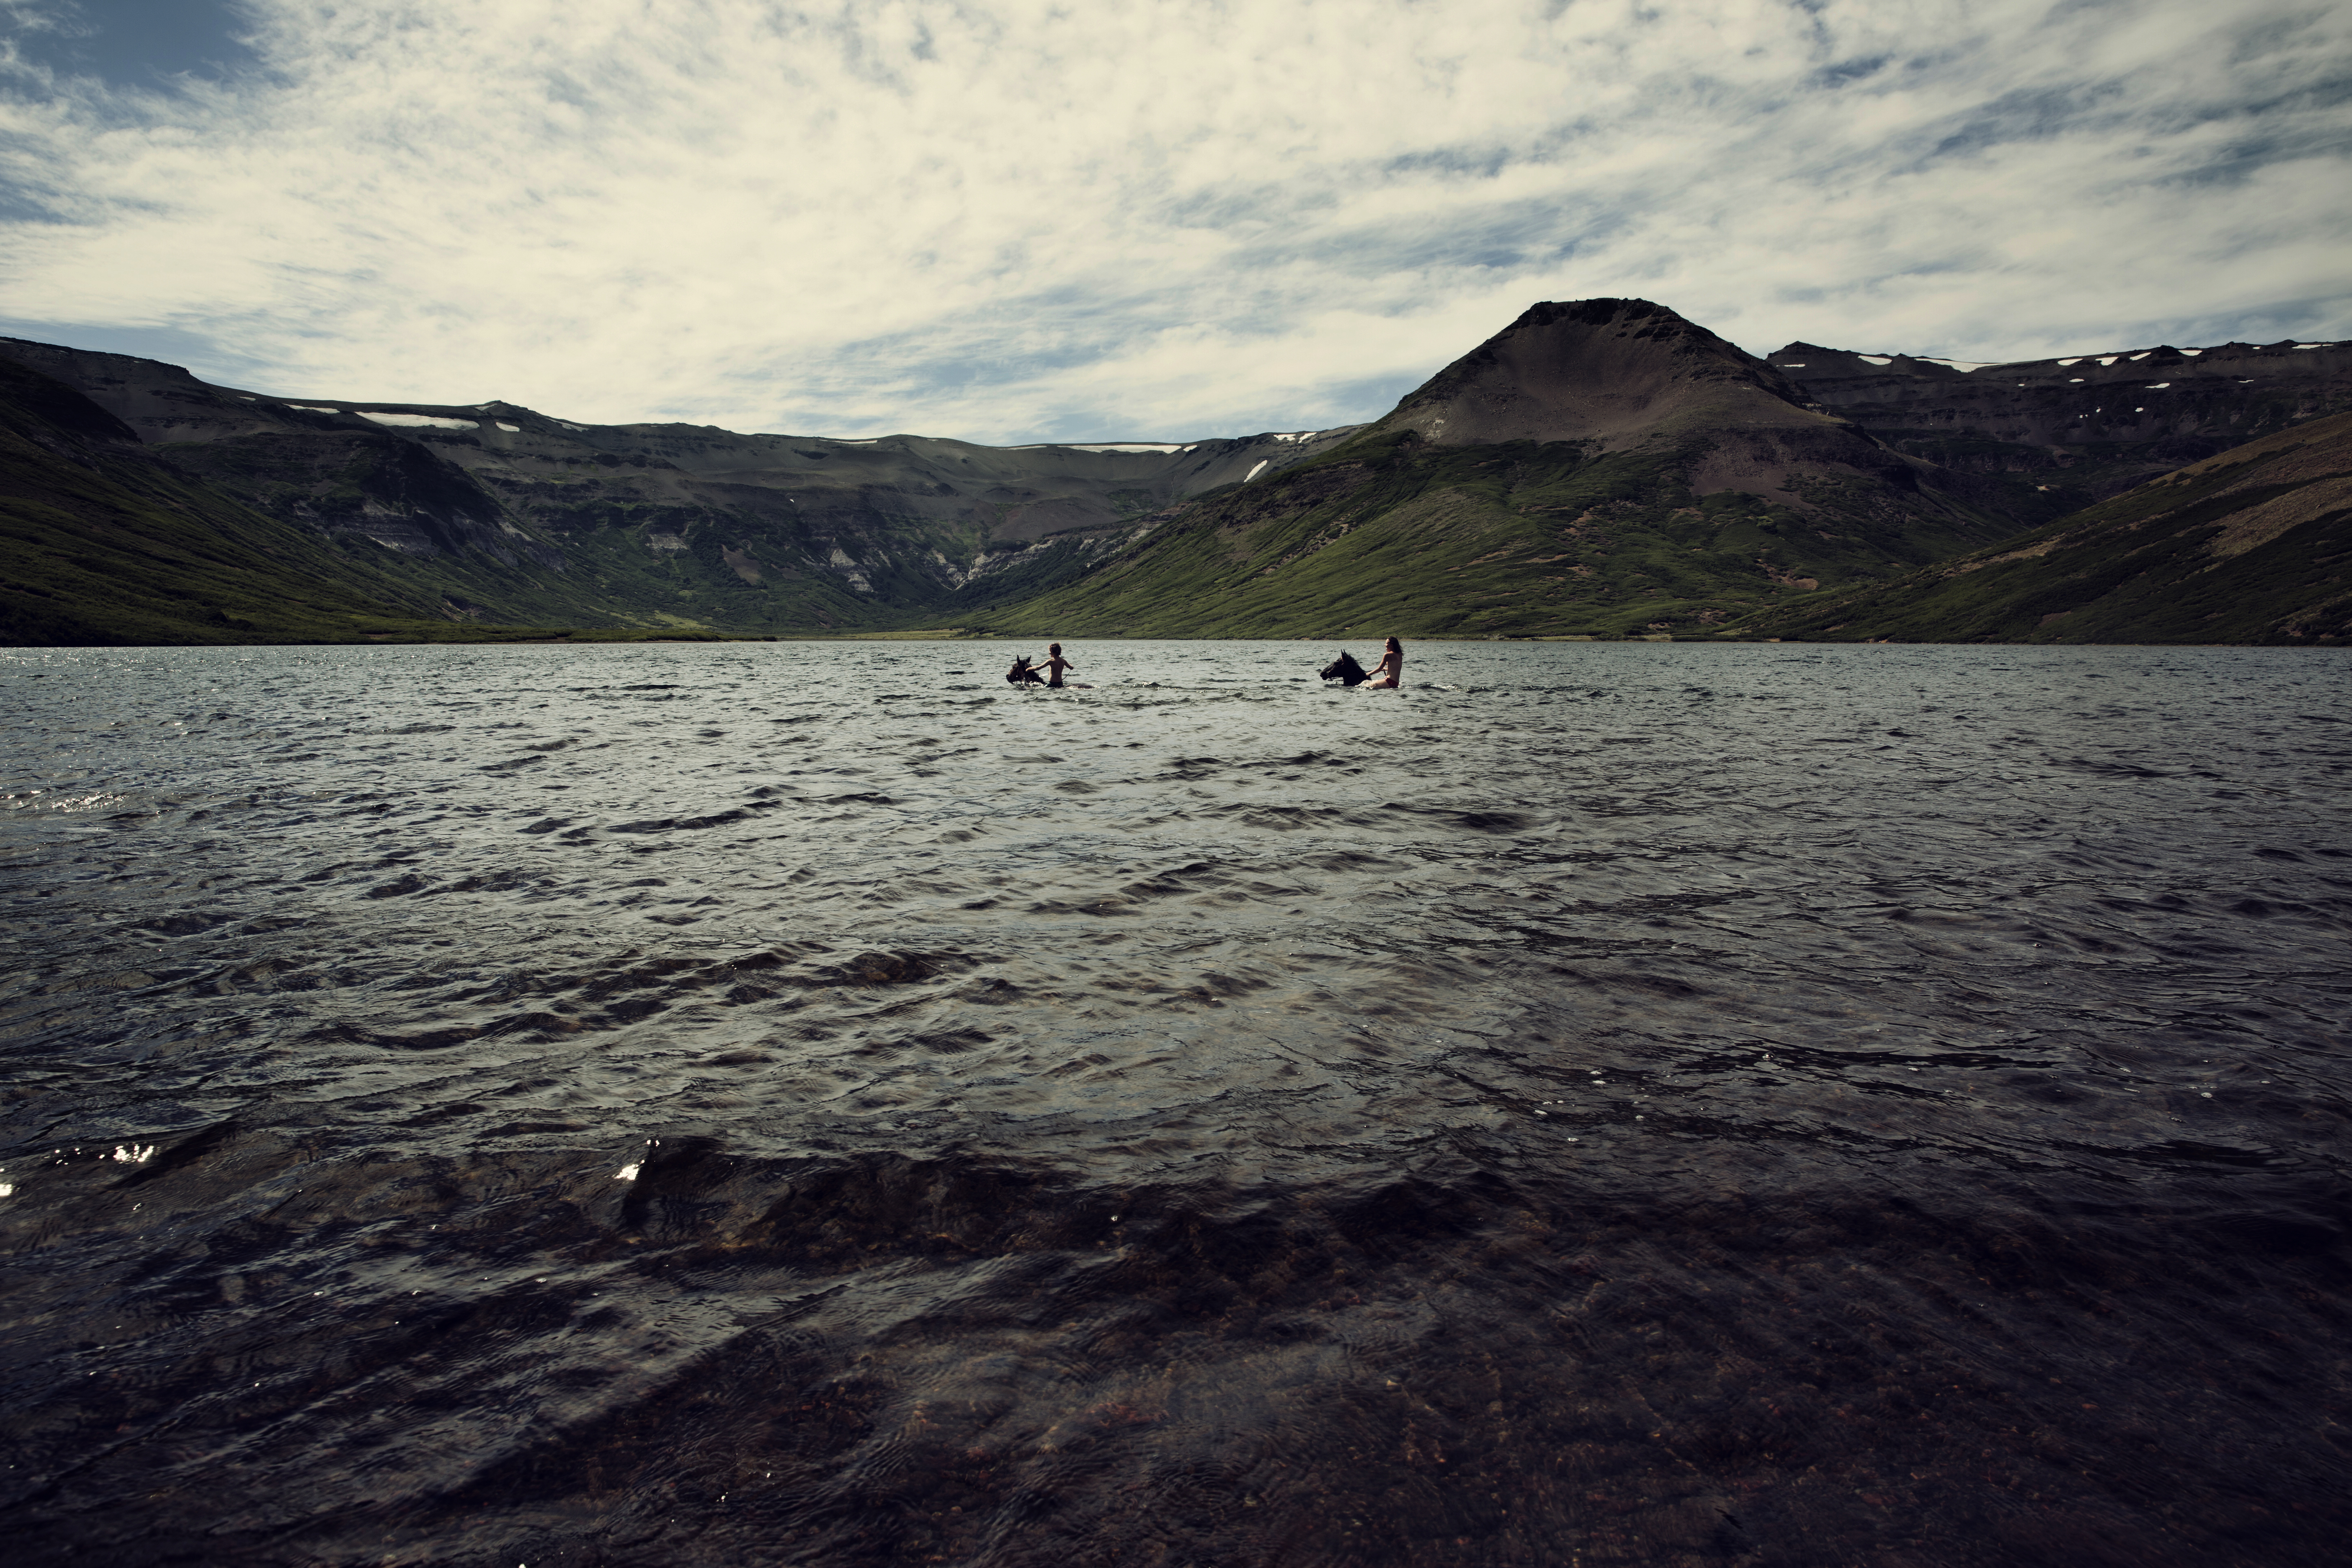 Two people swimming on horses in alpine lake on horse vacation at Estancia Ranquilco in Patagonia Argentina 